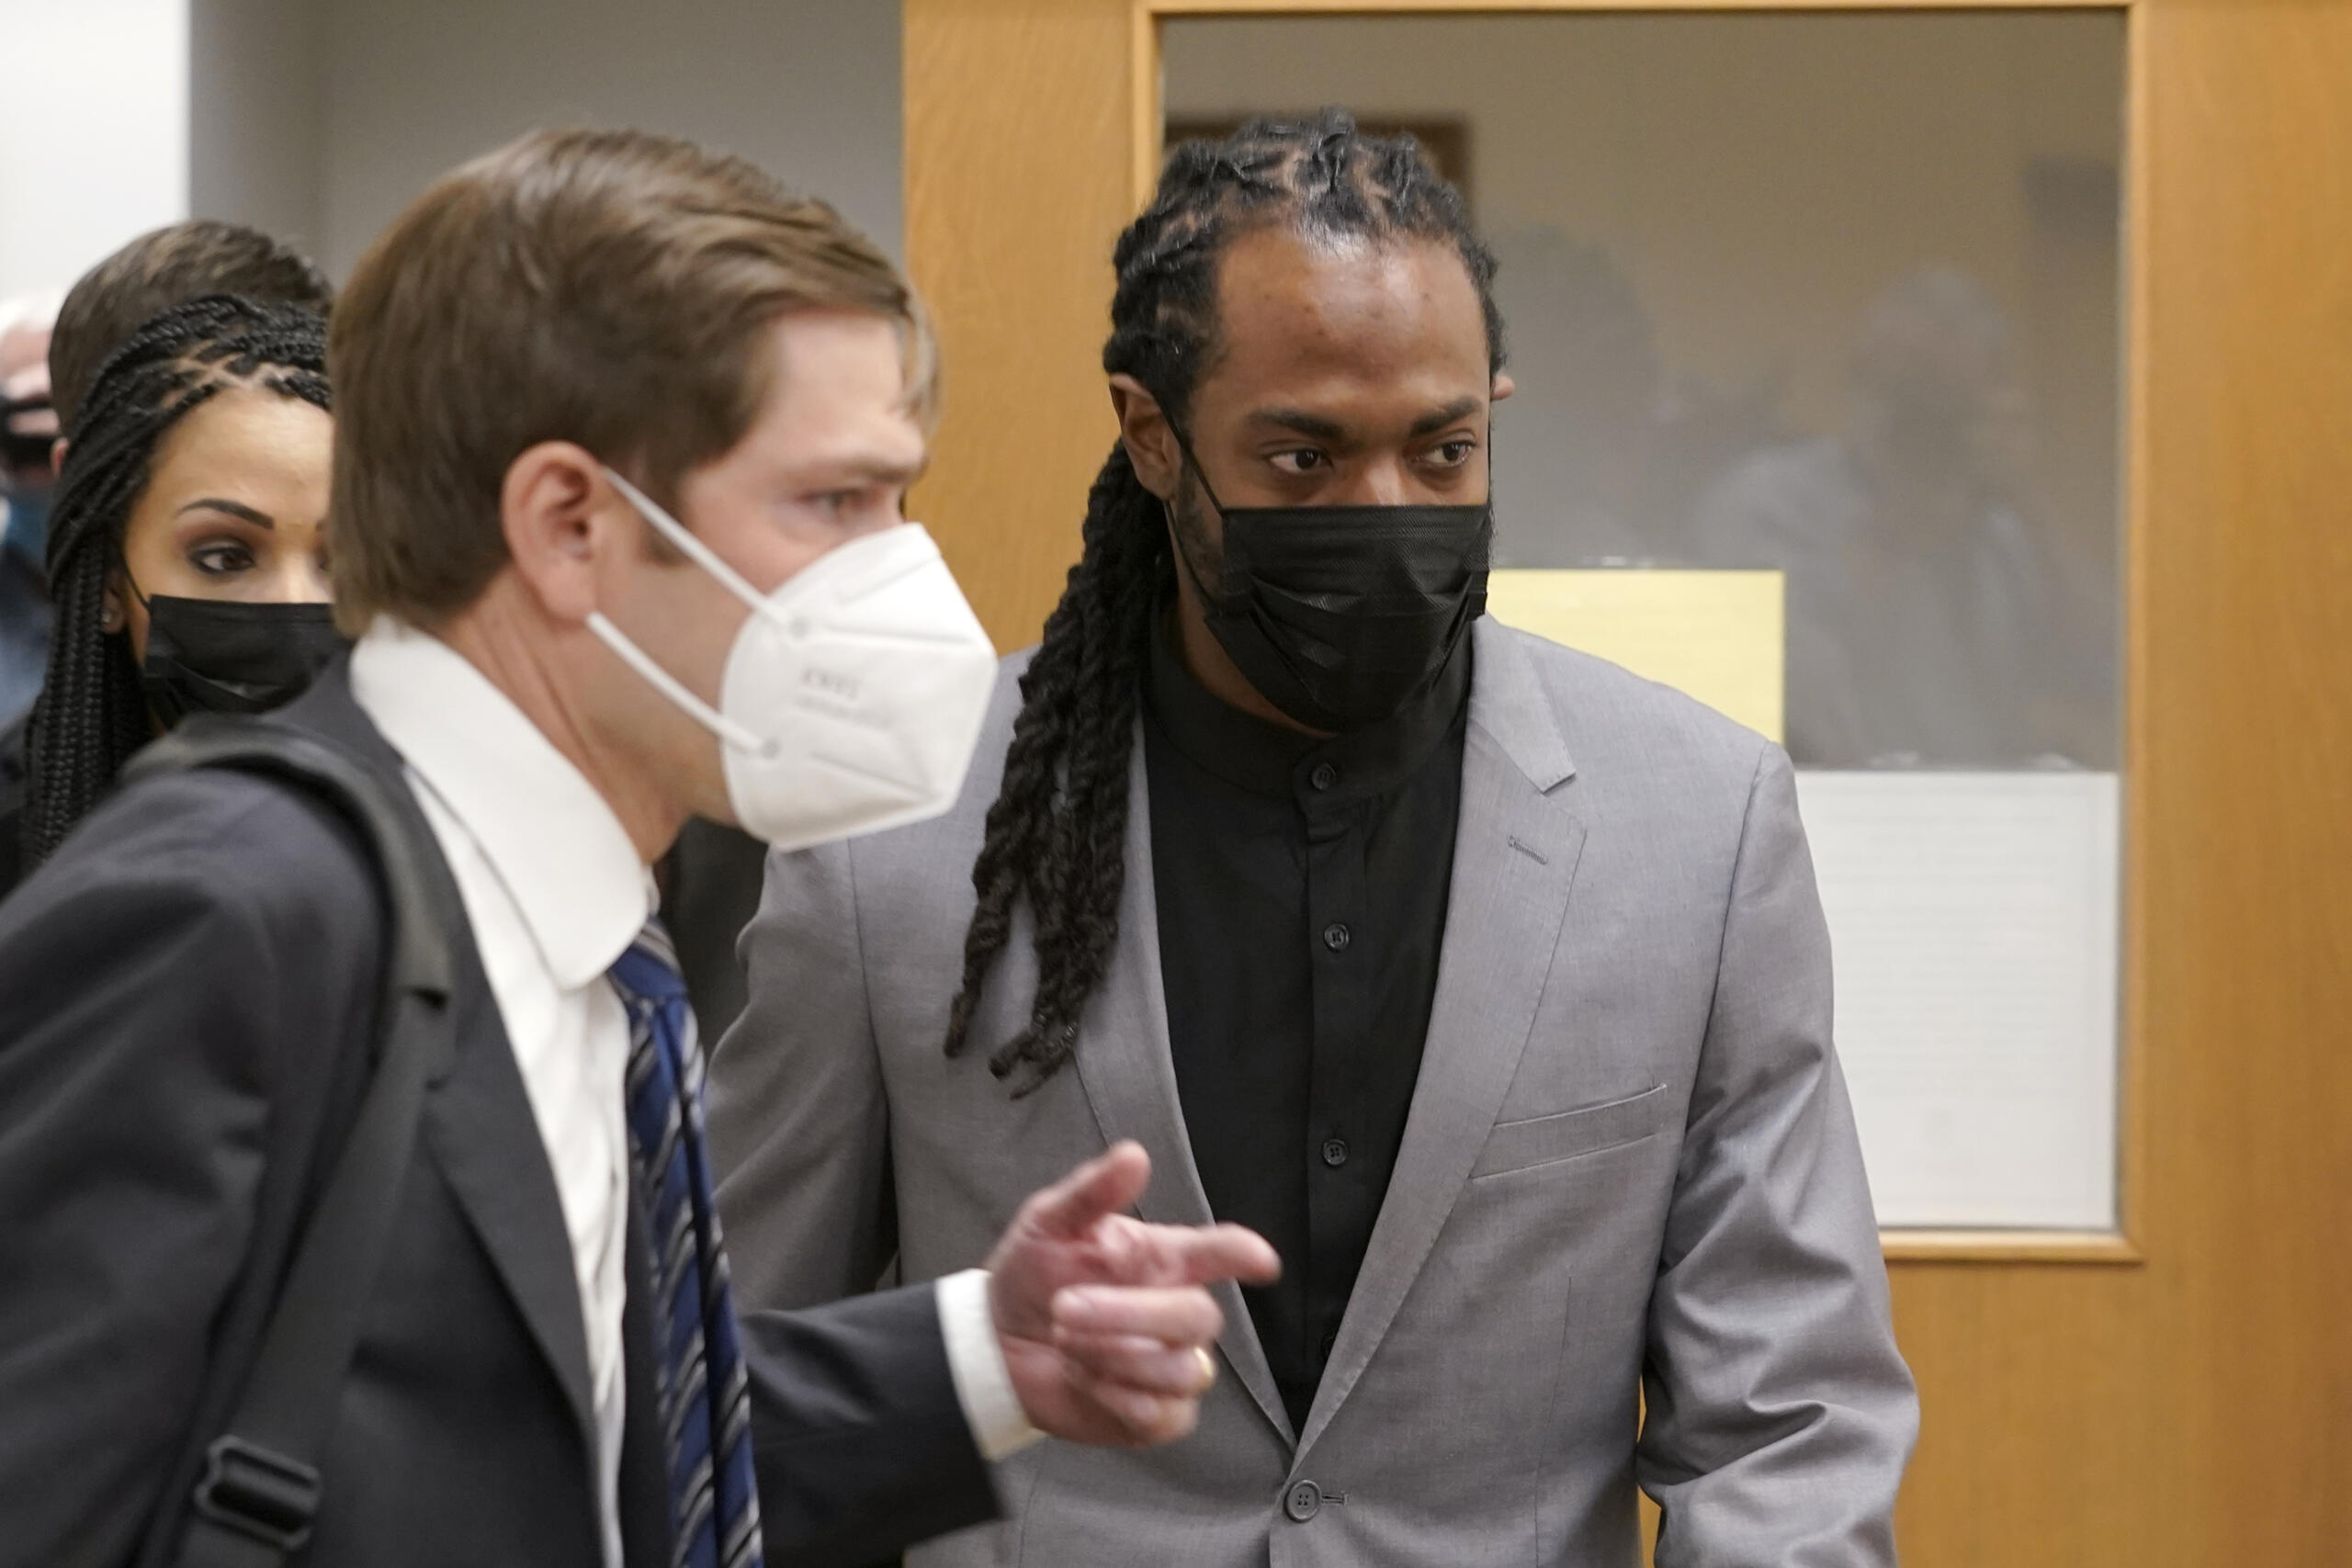 NFL football player Richard Sherman, right, heads into a hearing at King County District Court with his attorney Cooper Offenbecher, Friday, July 16, 2021, in Seattle. Prosecutors in Washington state have charged Sherman, who has played for the Seattle Seahawks and the San Francisco 49ers NFL football teams, after police said he drunkenly crashed his SUV in a construction zone and tried to break into his in-laws' home. (AP Photo/Ted S.